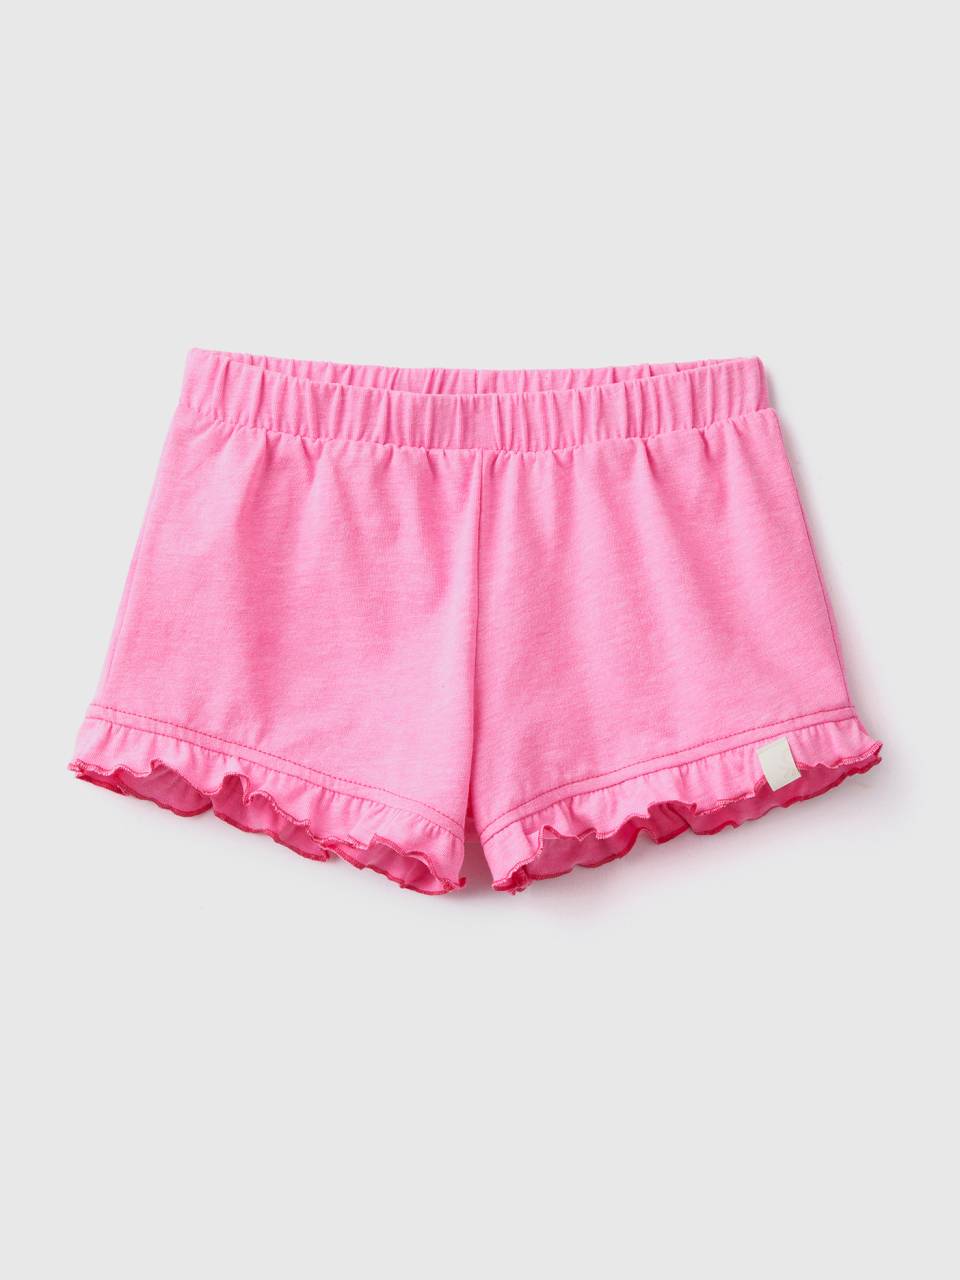 Benetton shorts in recycled fabric with ruffles. 1